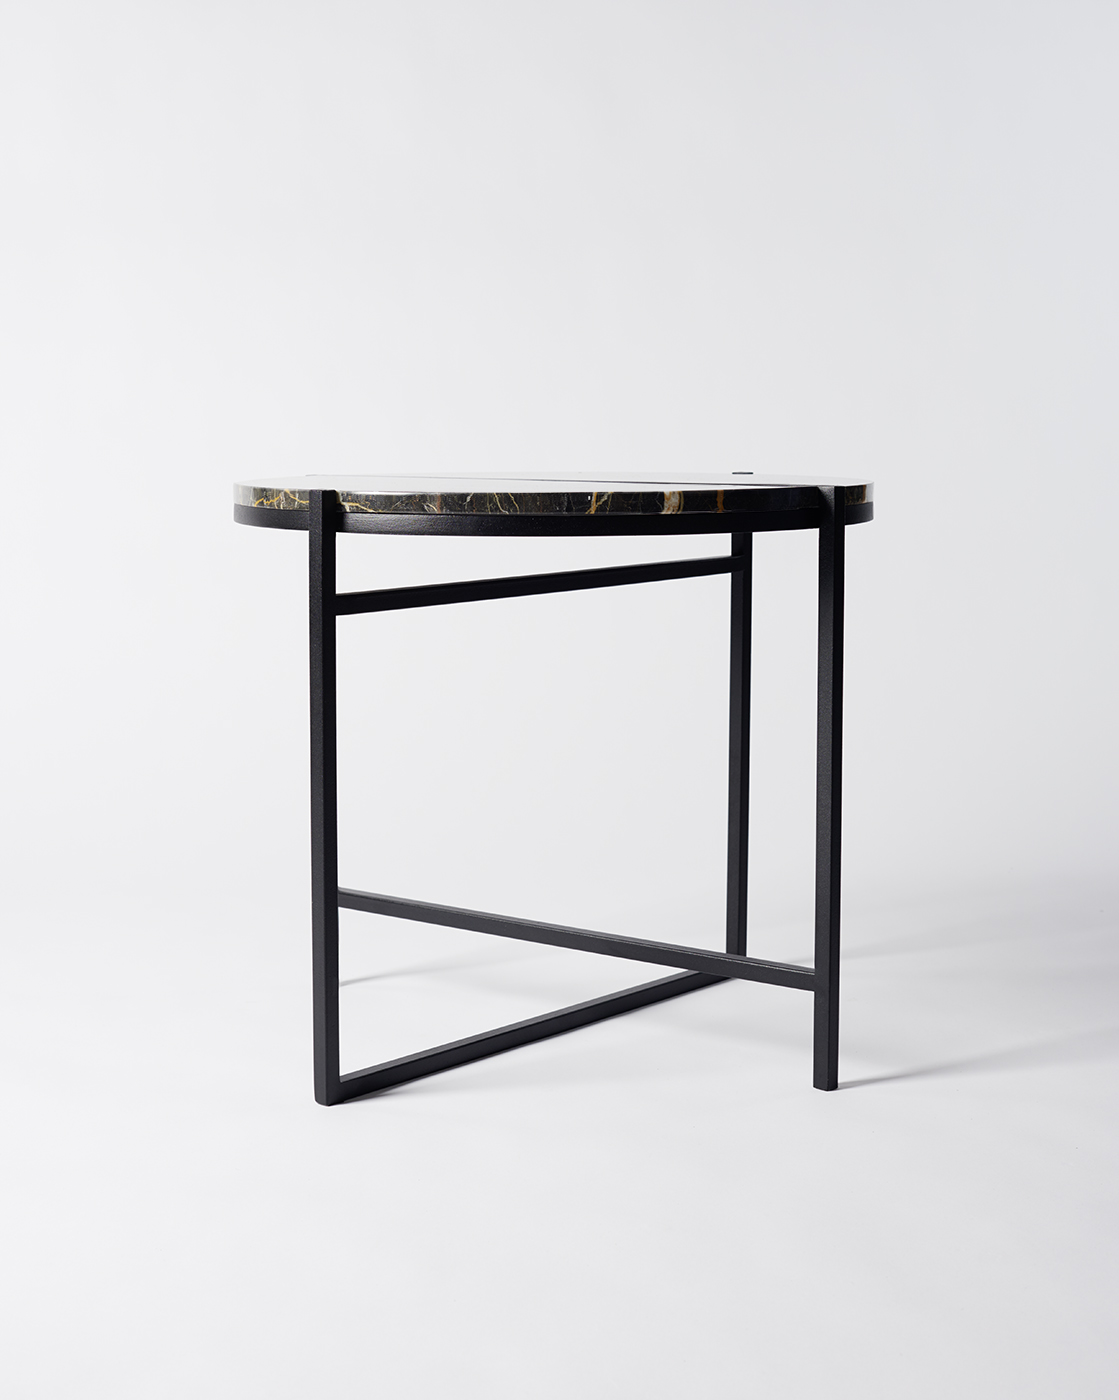 Other Way Round table by Isabell Gatzen | Flodeau.com